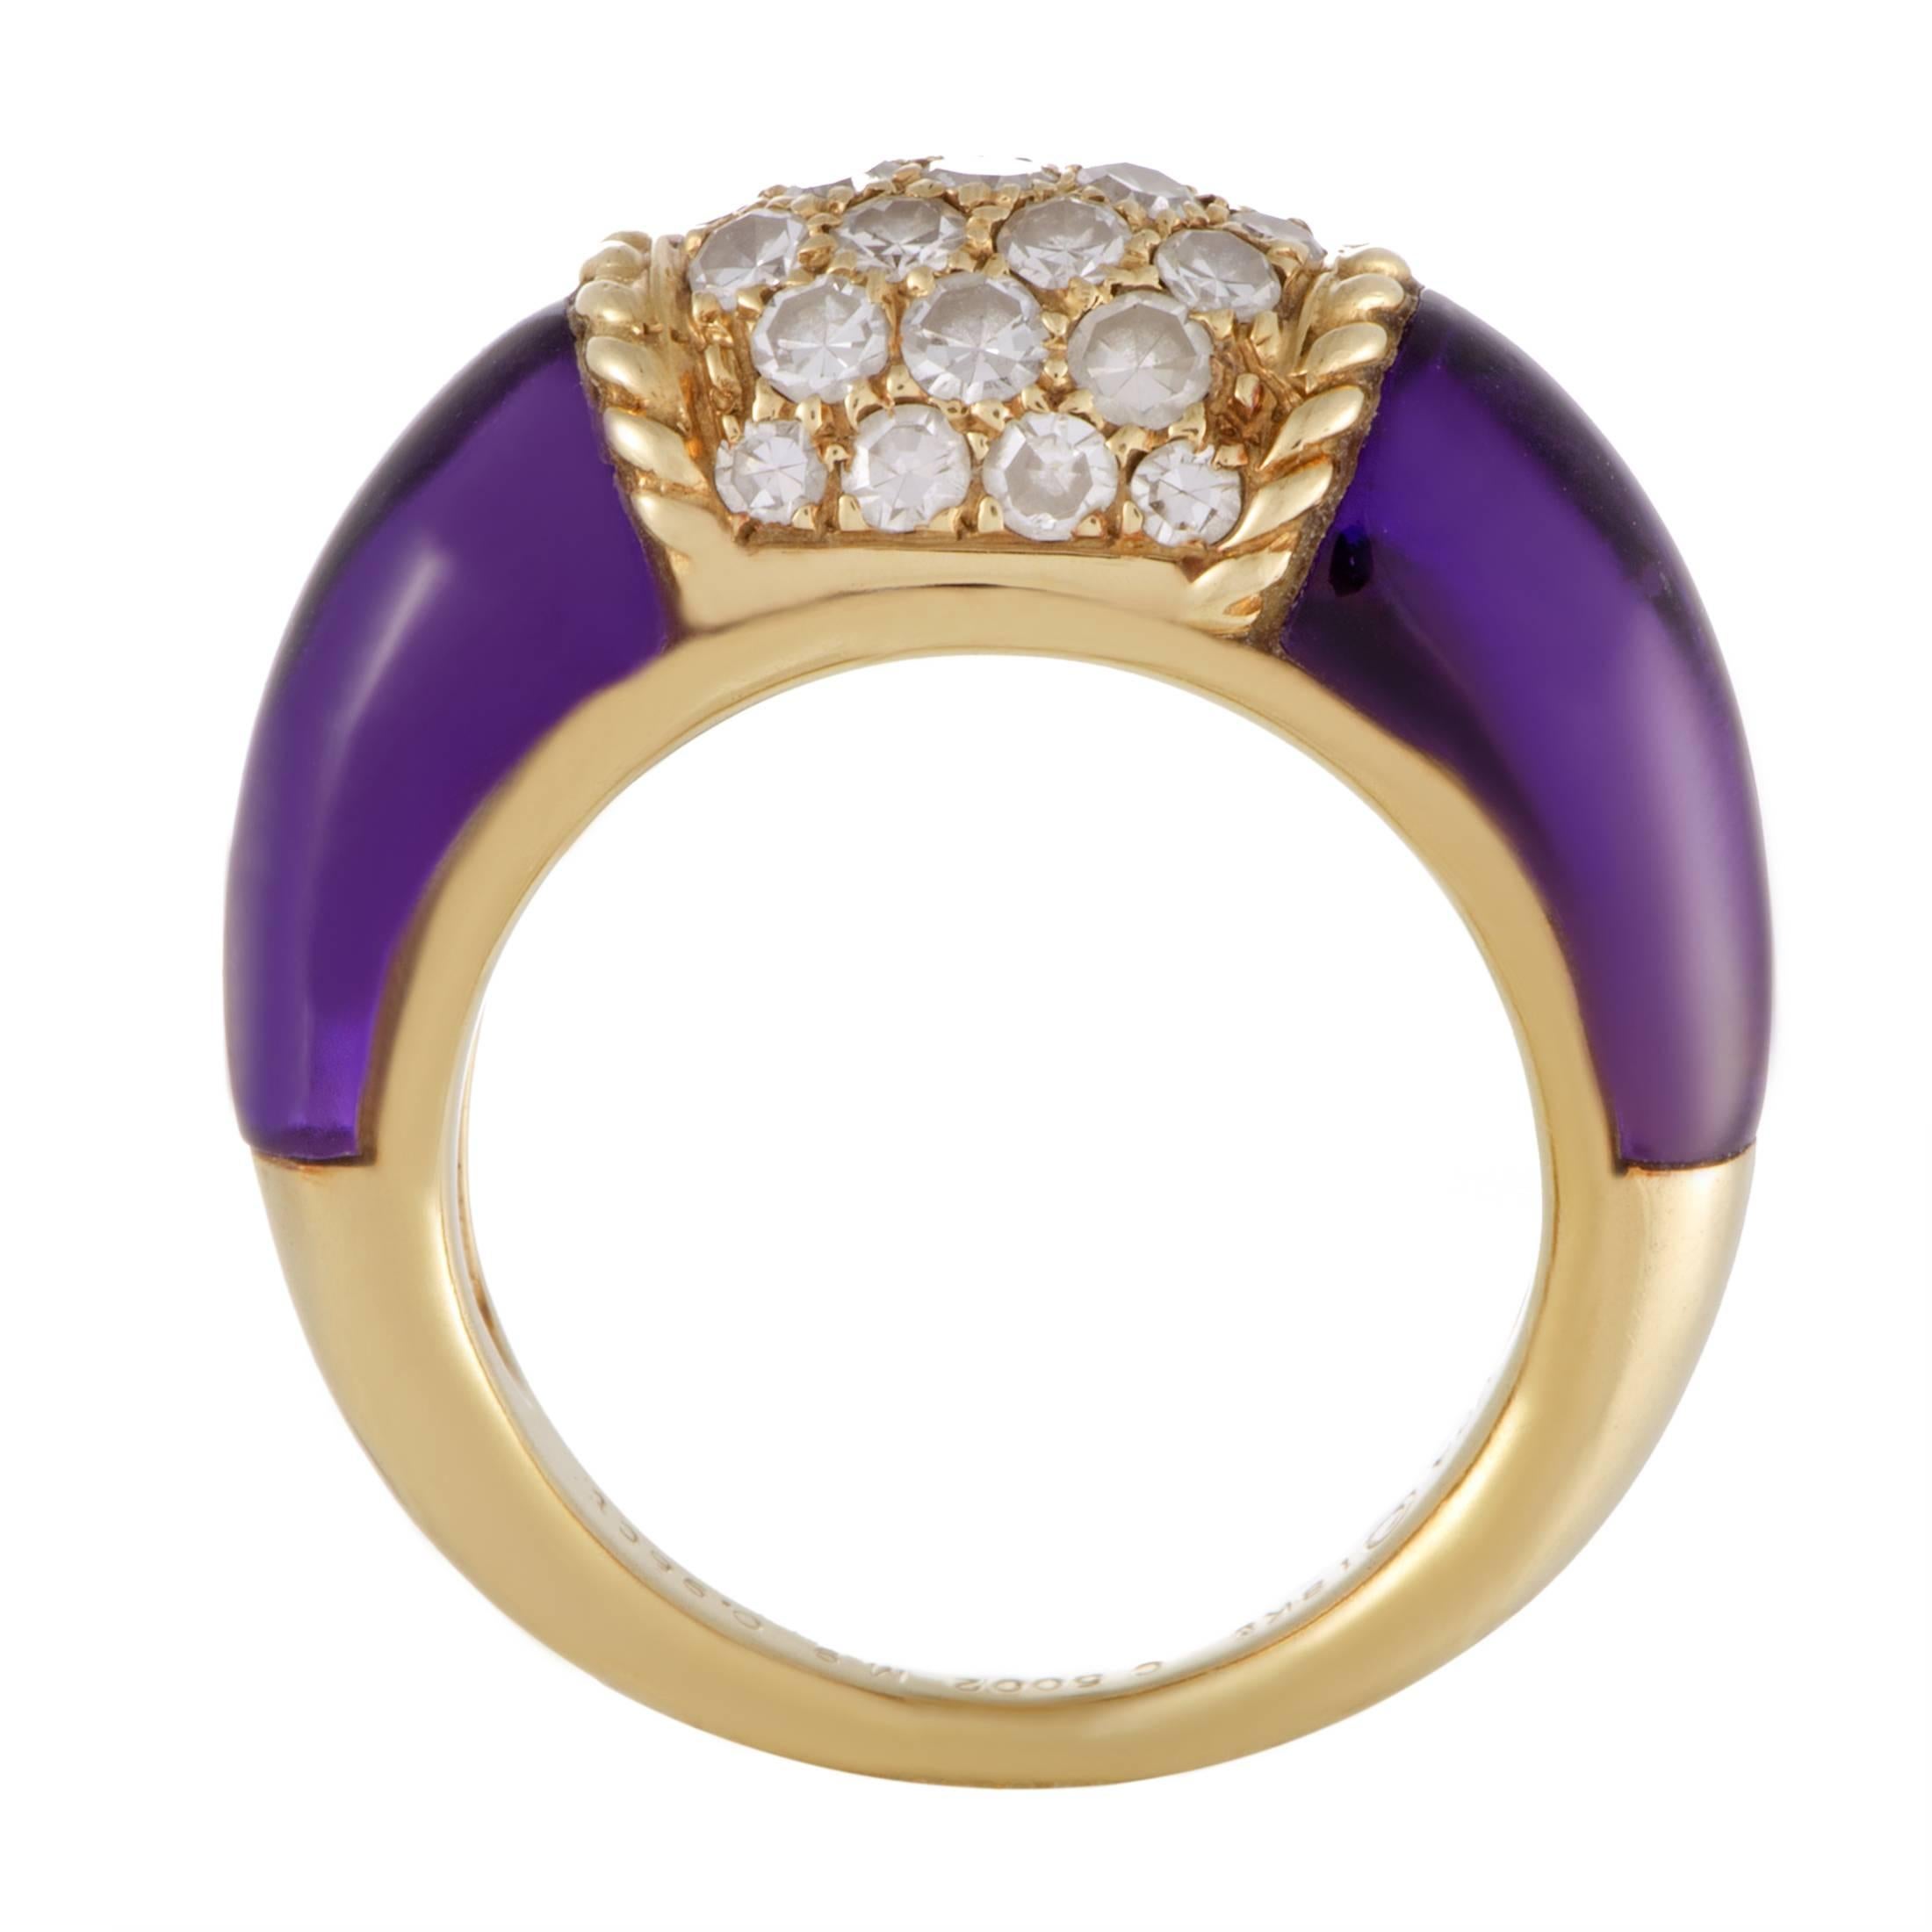 Complemented by delightfully smooth and gorgeous amethysts on both sides, the scintillating arrangement of diamonds totaling 0.96ct stands out in fascinating fashion against the 18K yellow gold to produce a charming allure in this exceptional ring